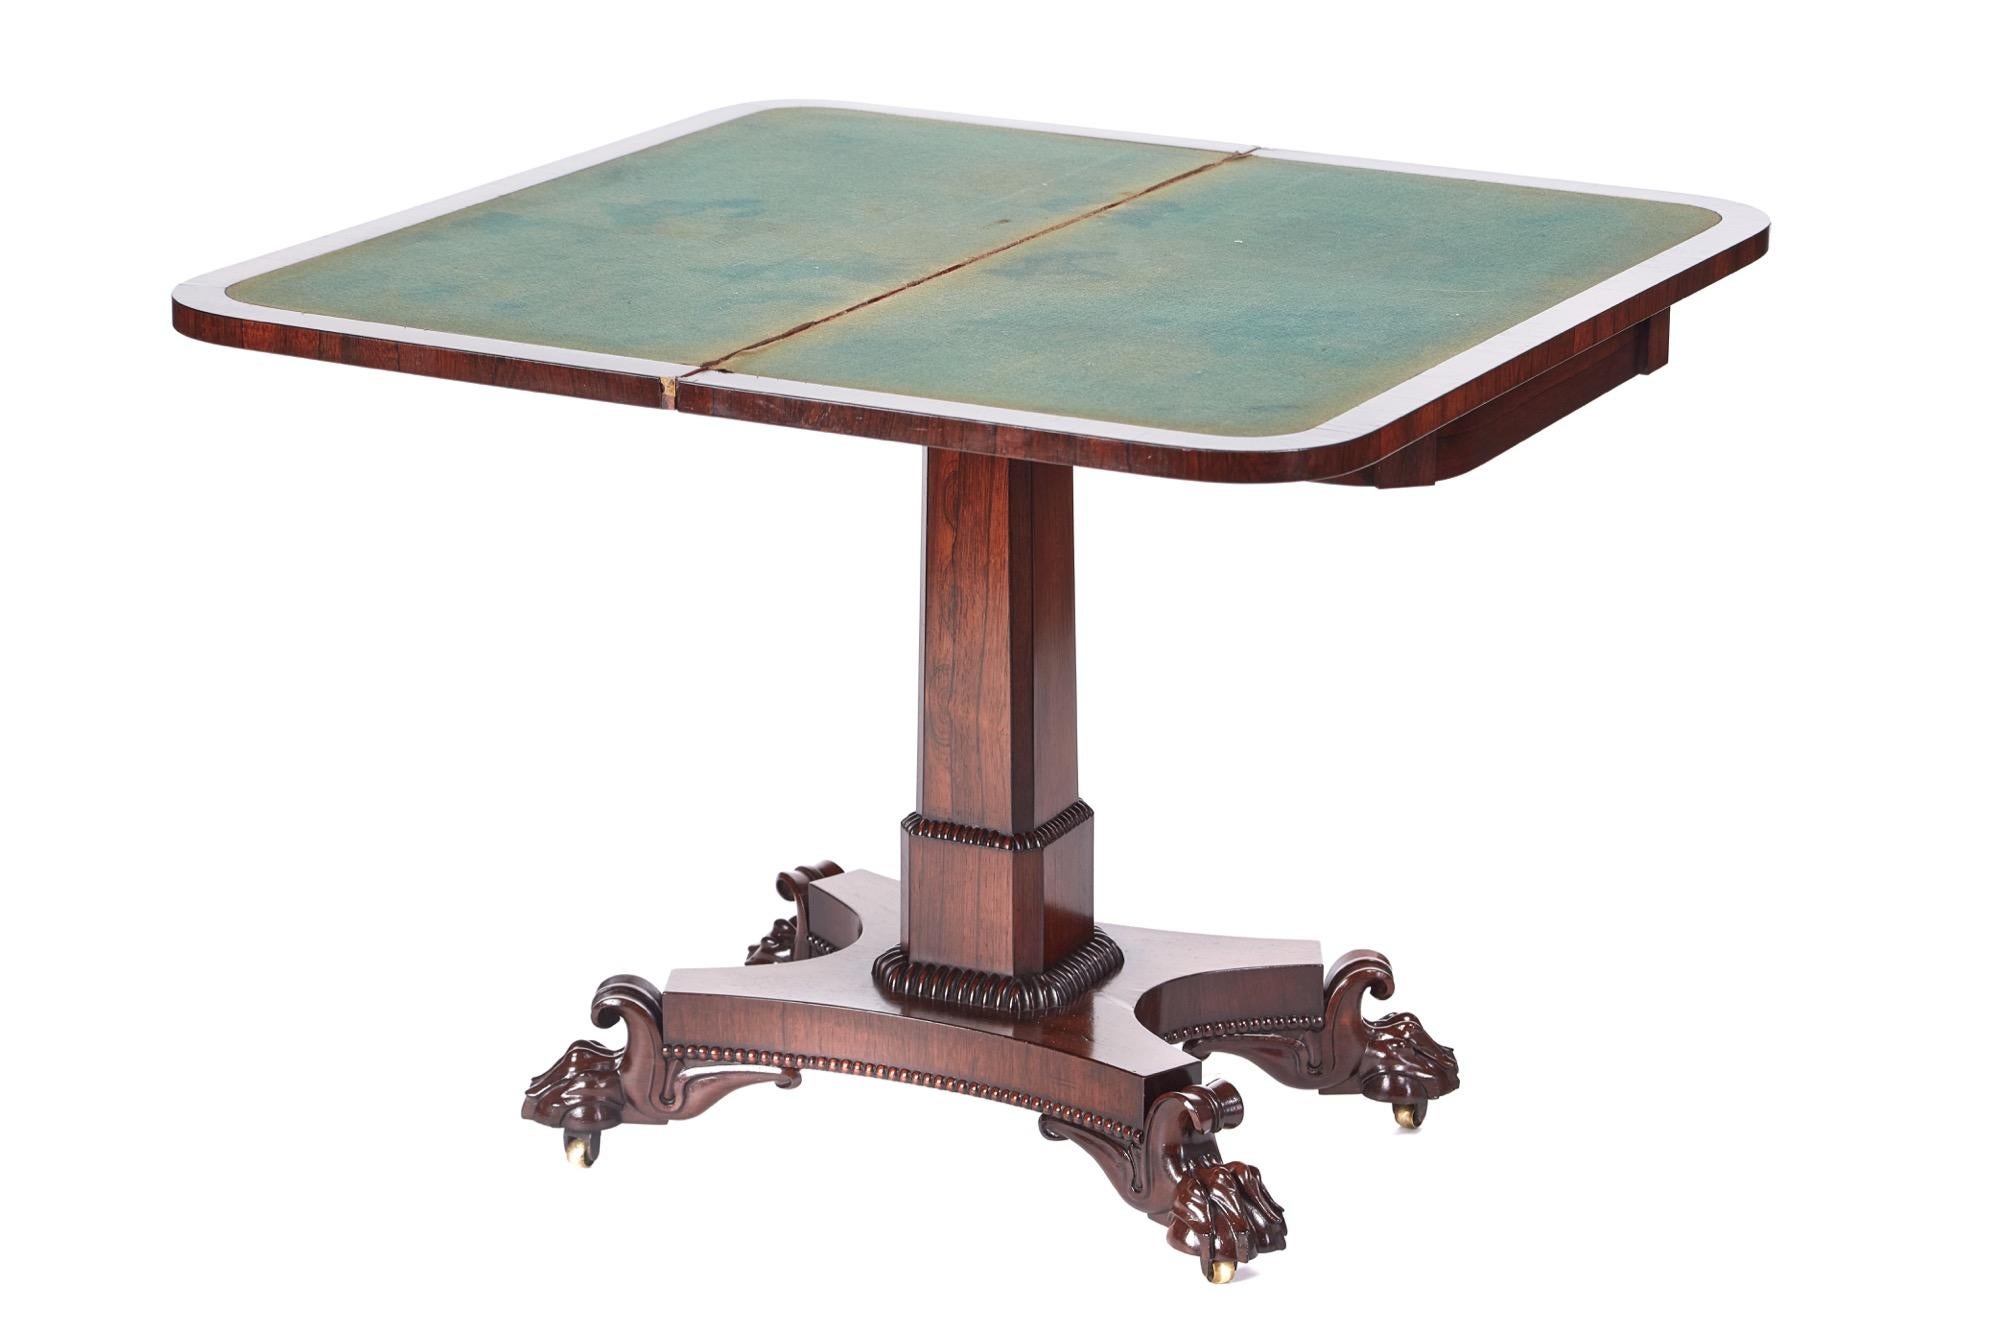 This is a quality William IV antique rosewood card/side table with a lovely figured rosewood crossbanded top that lifts up and swivels to reveal the original green baize interior, rosewood frieze supported by an elegant shaped pedestal. Finishing on